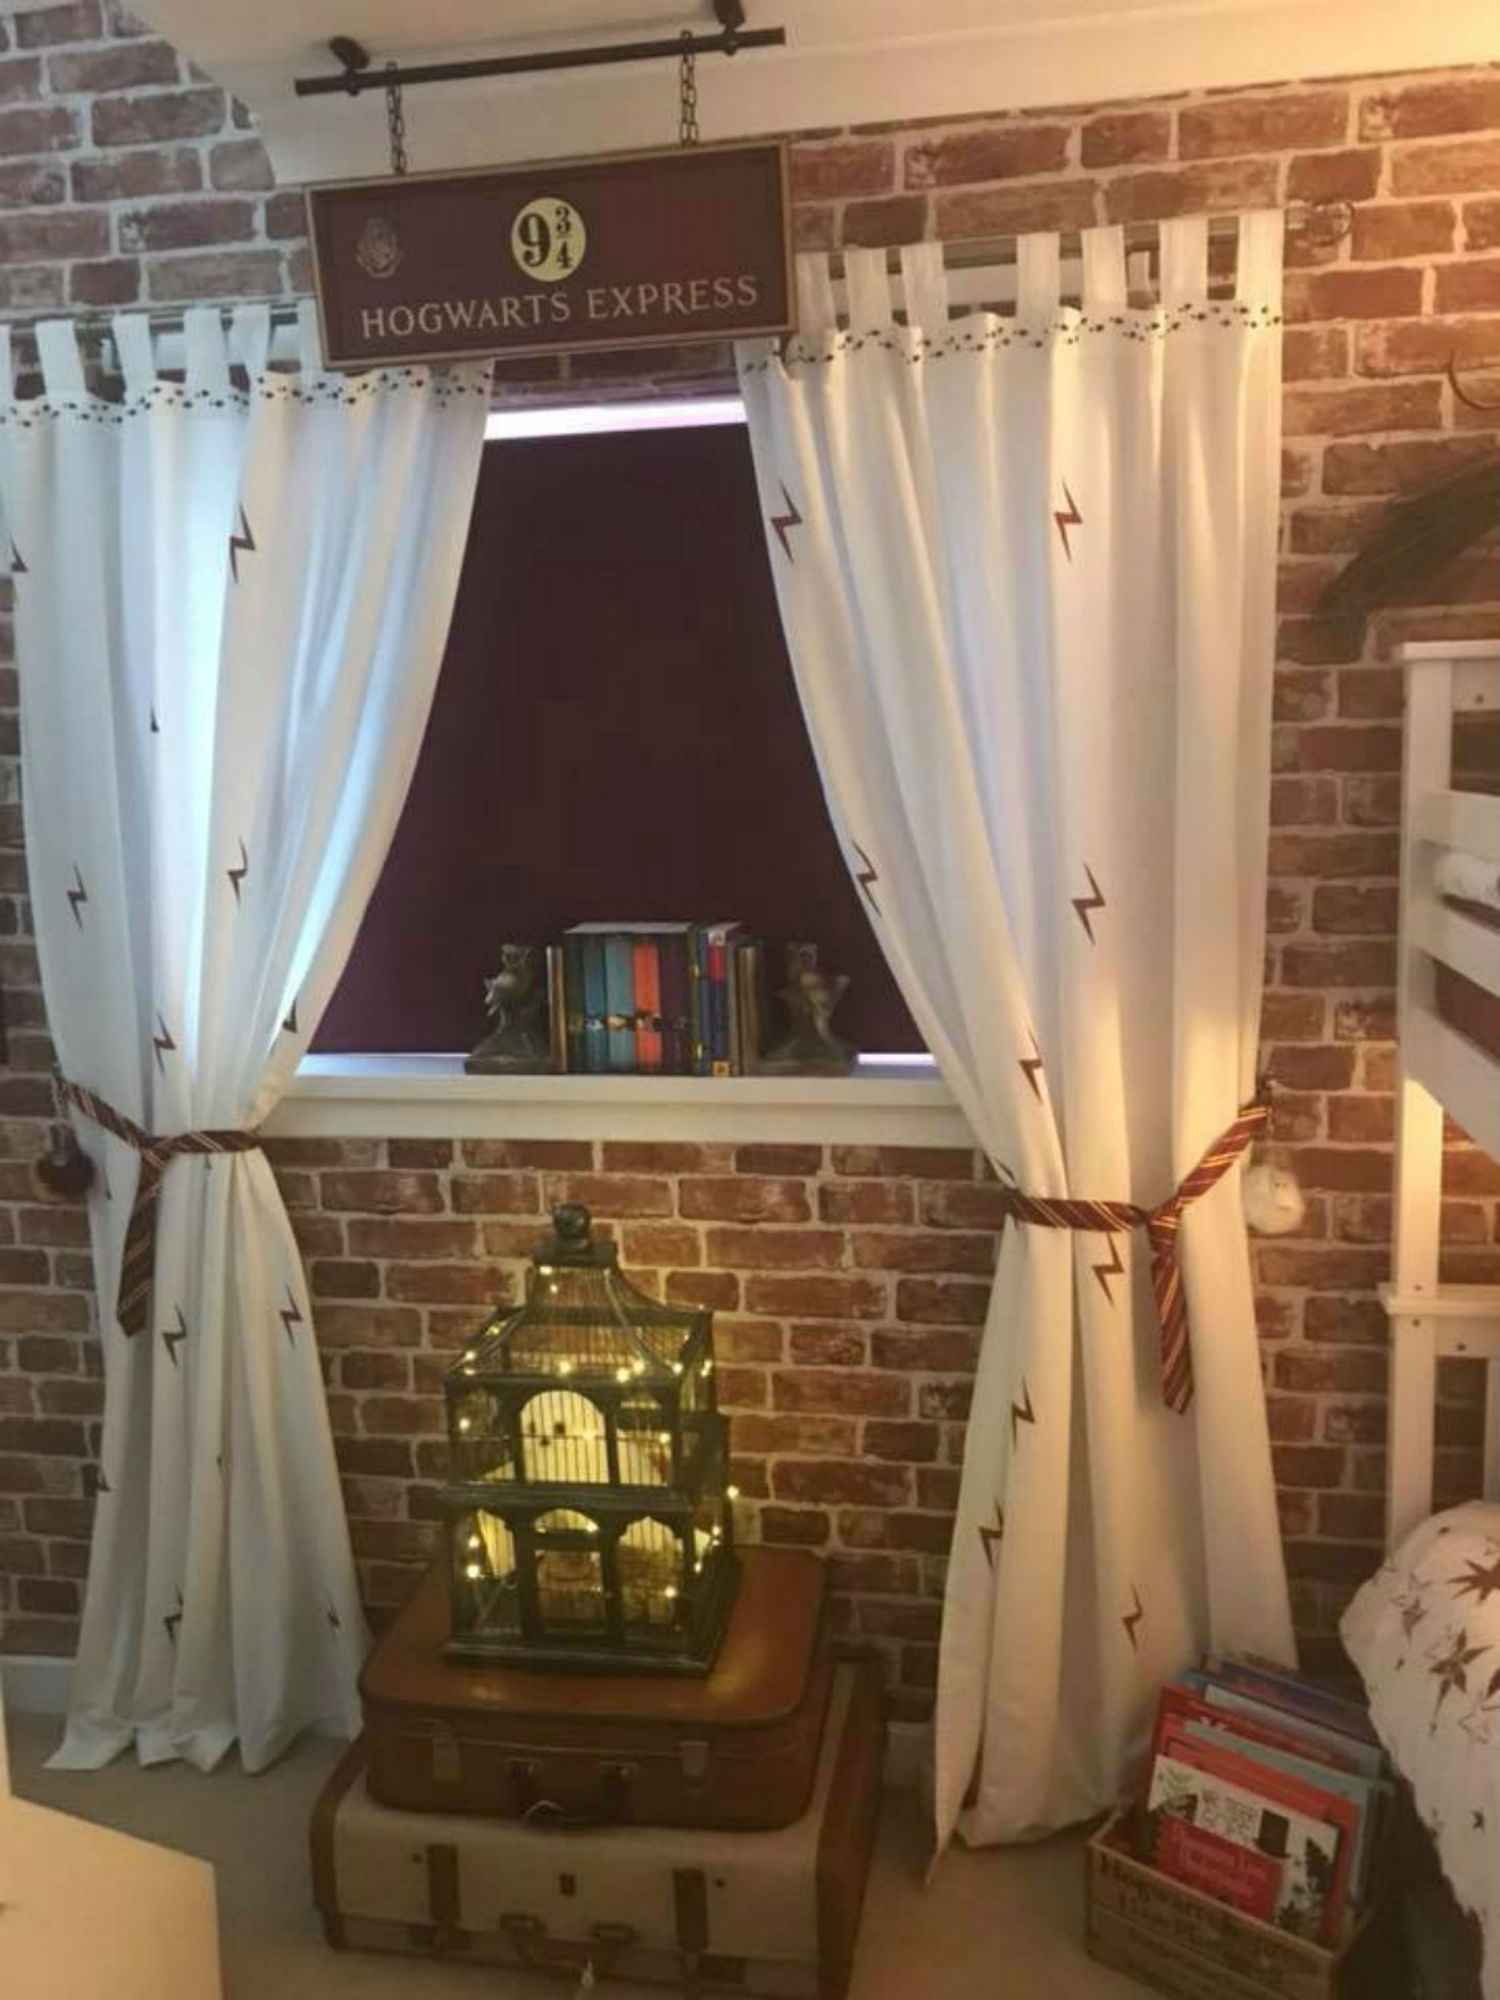 Harry Potter Bedroom Wallpaper
 Mum creates amazing Harry Potter bedroom for boys while